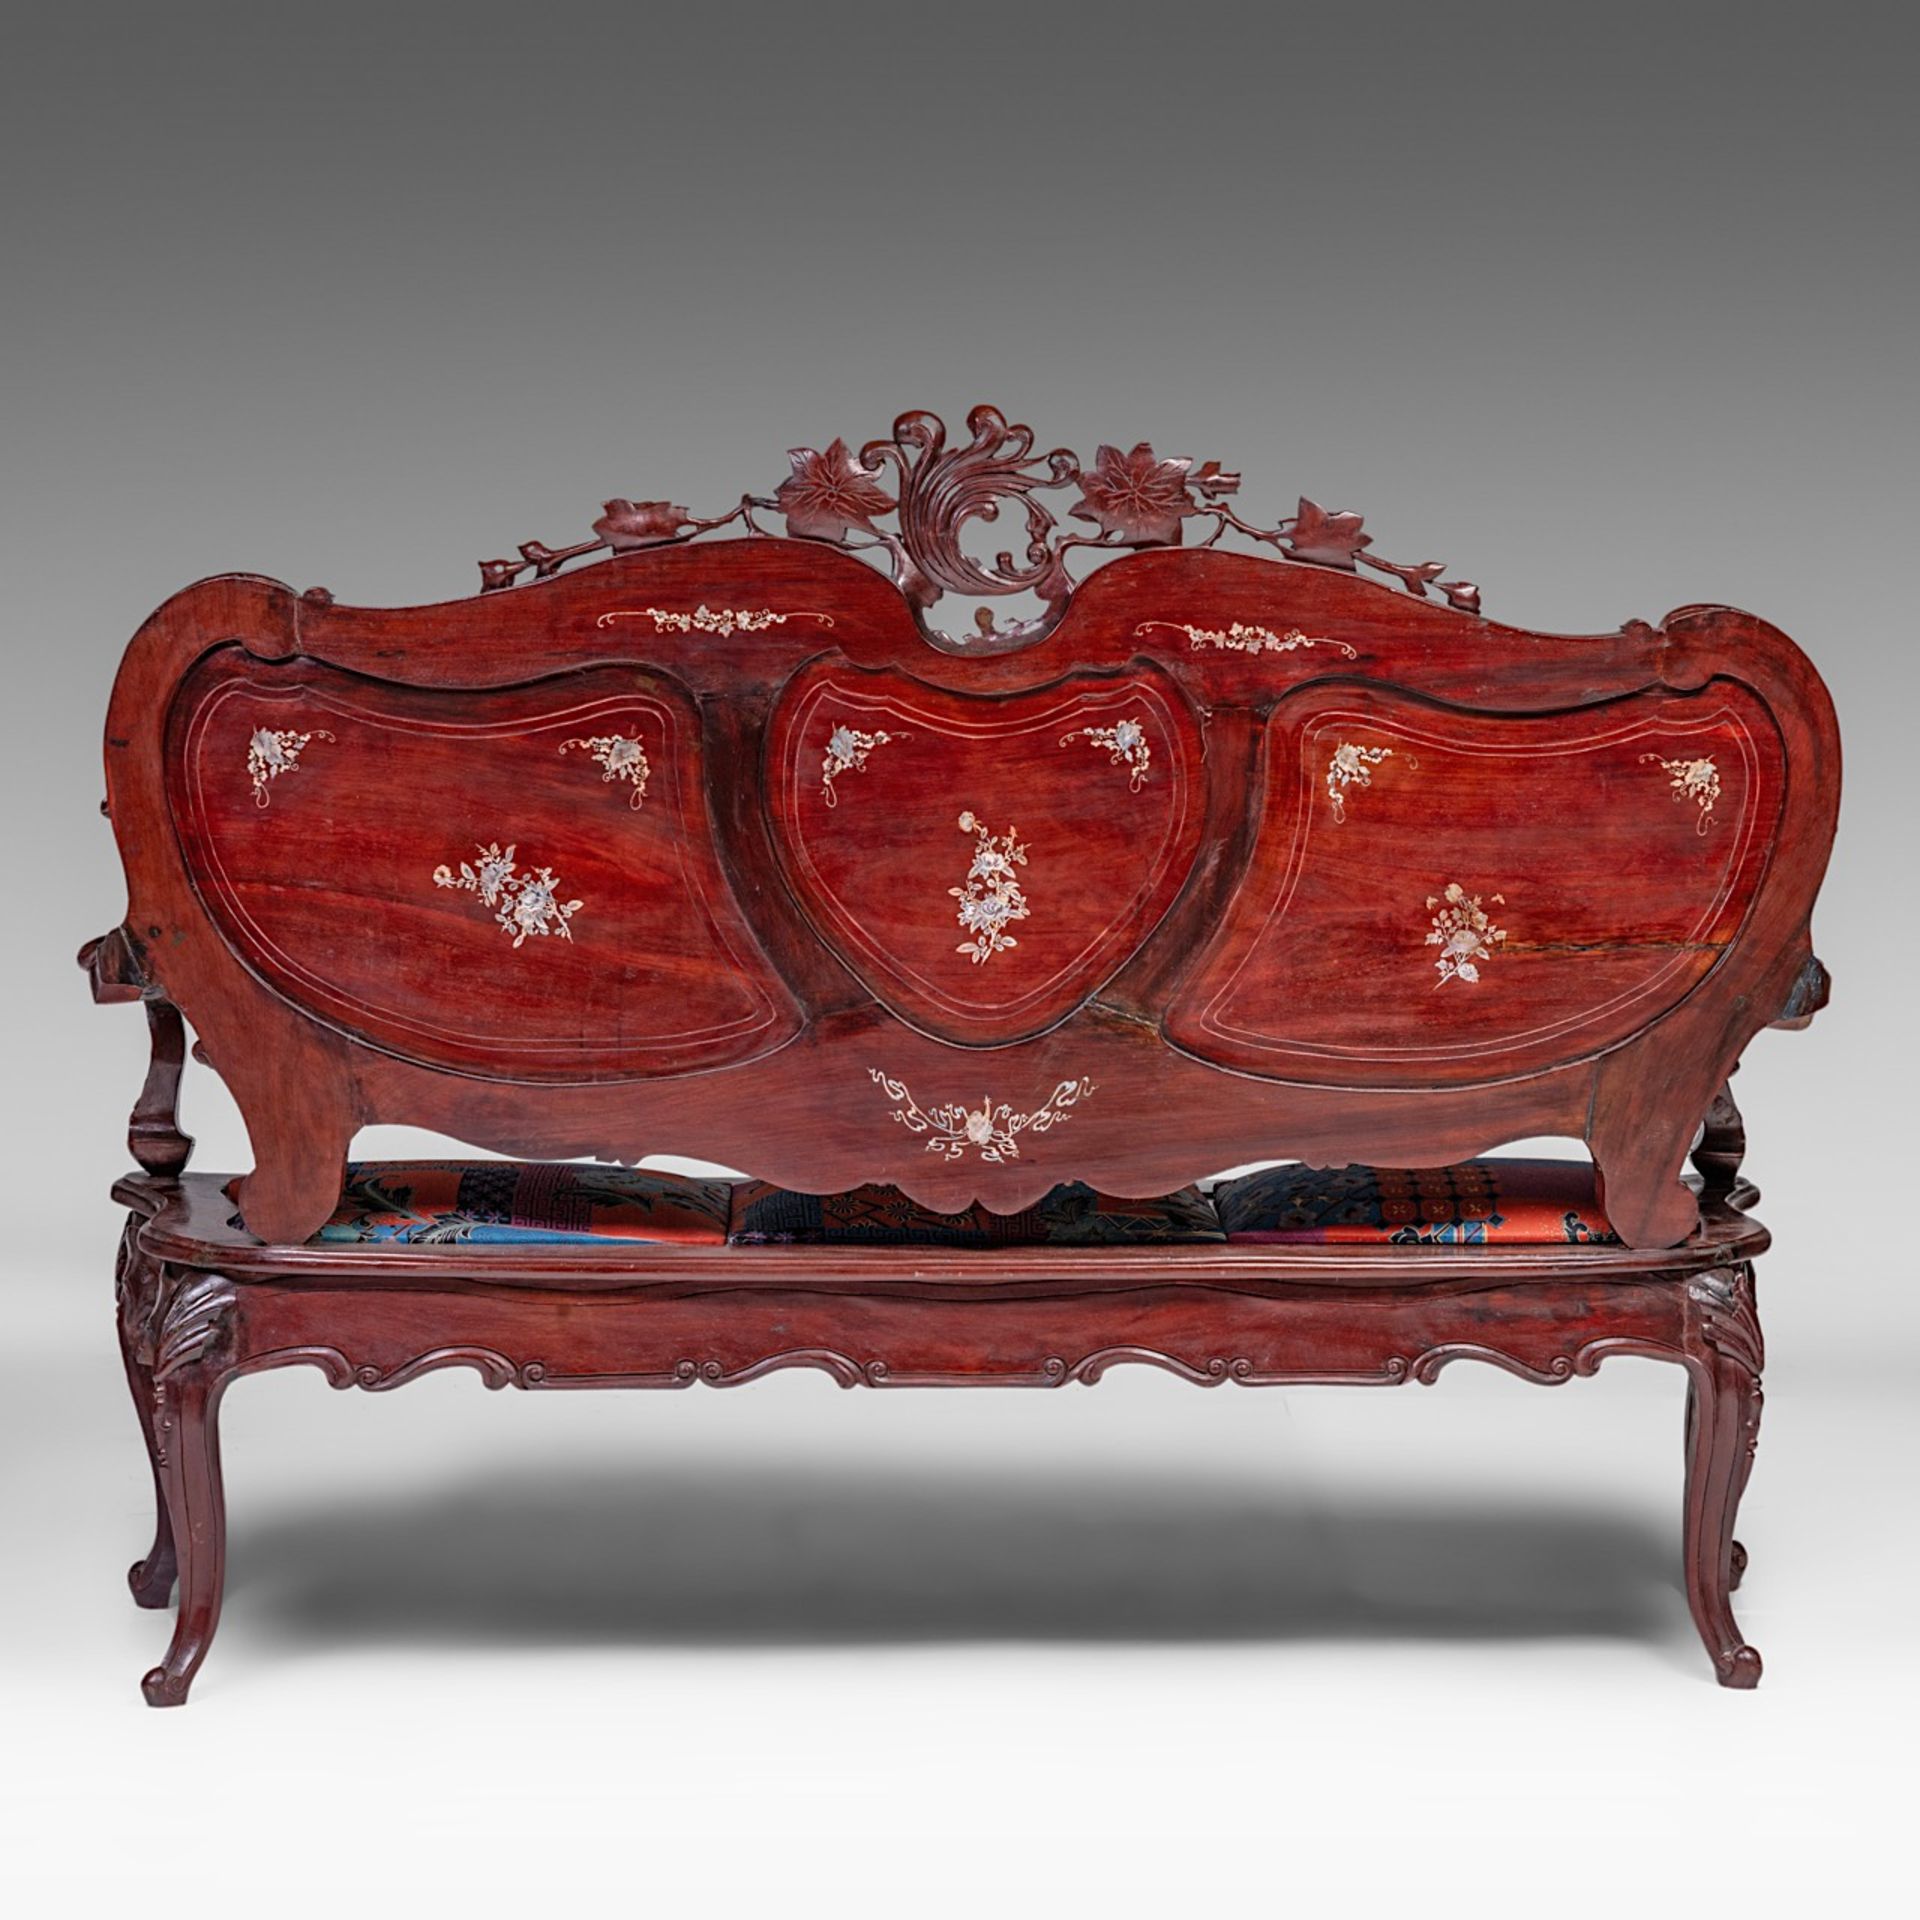 An Anglo-Chinese settee and two chairs, H settee 132 - H chair 108 cm - Image 16 of 24